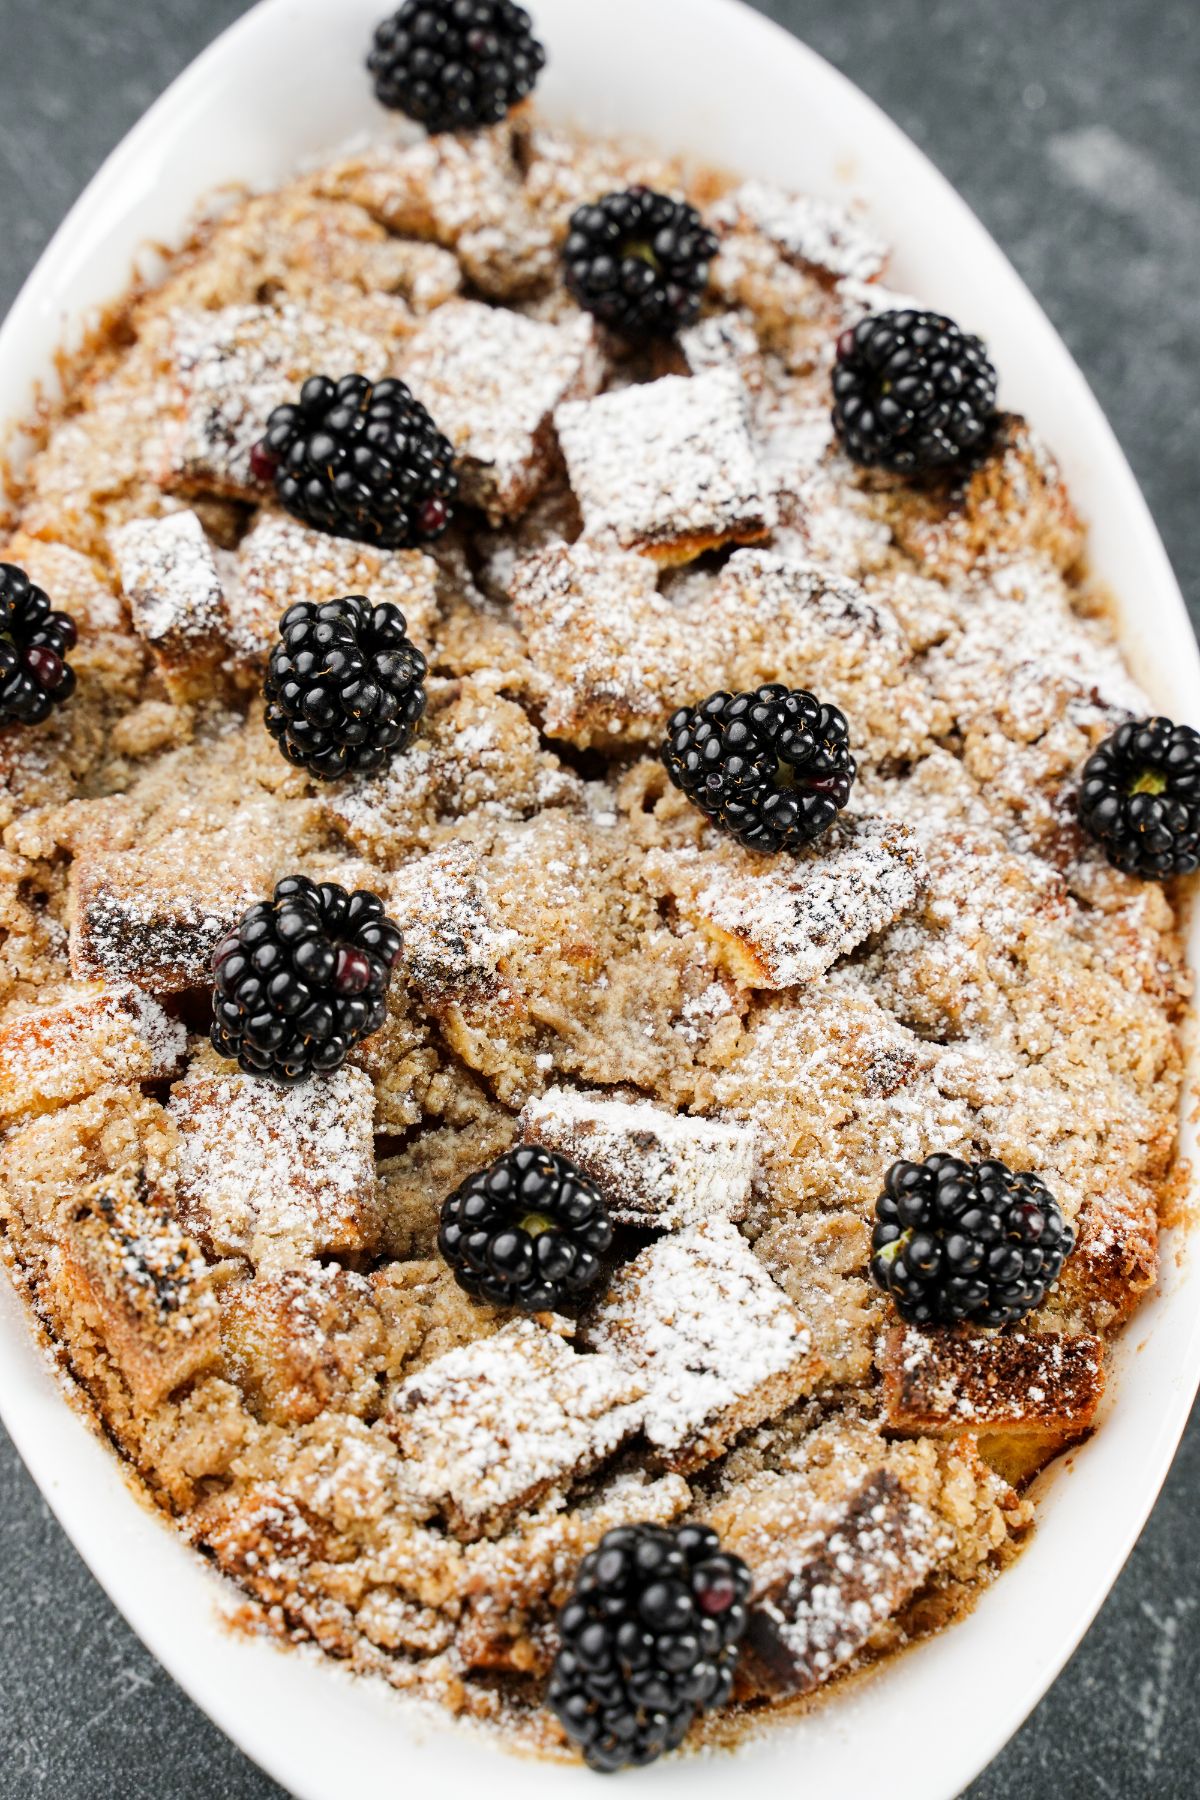 image looking down on baked french toast casserole in white dish